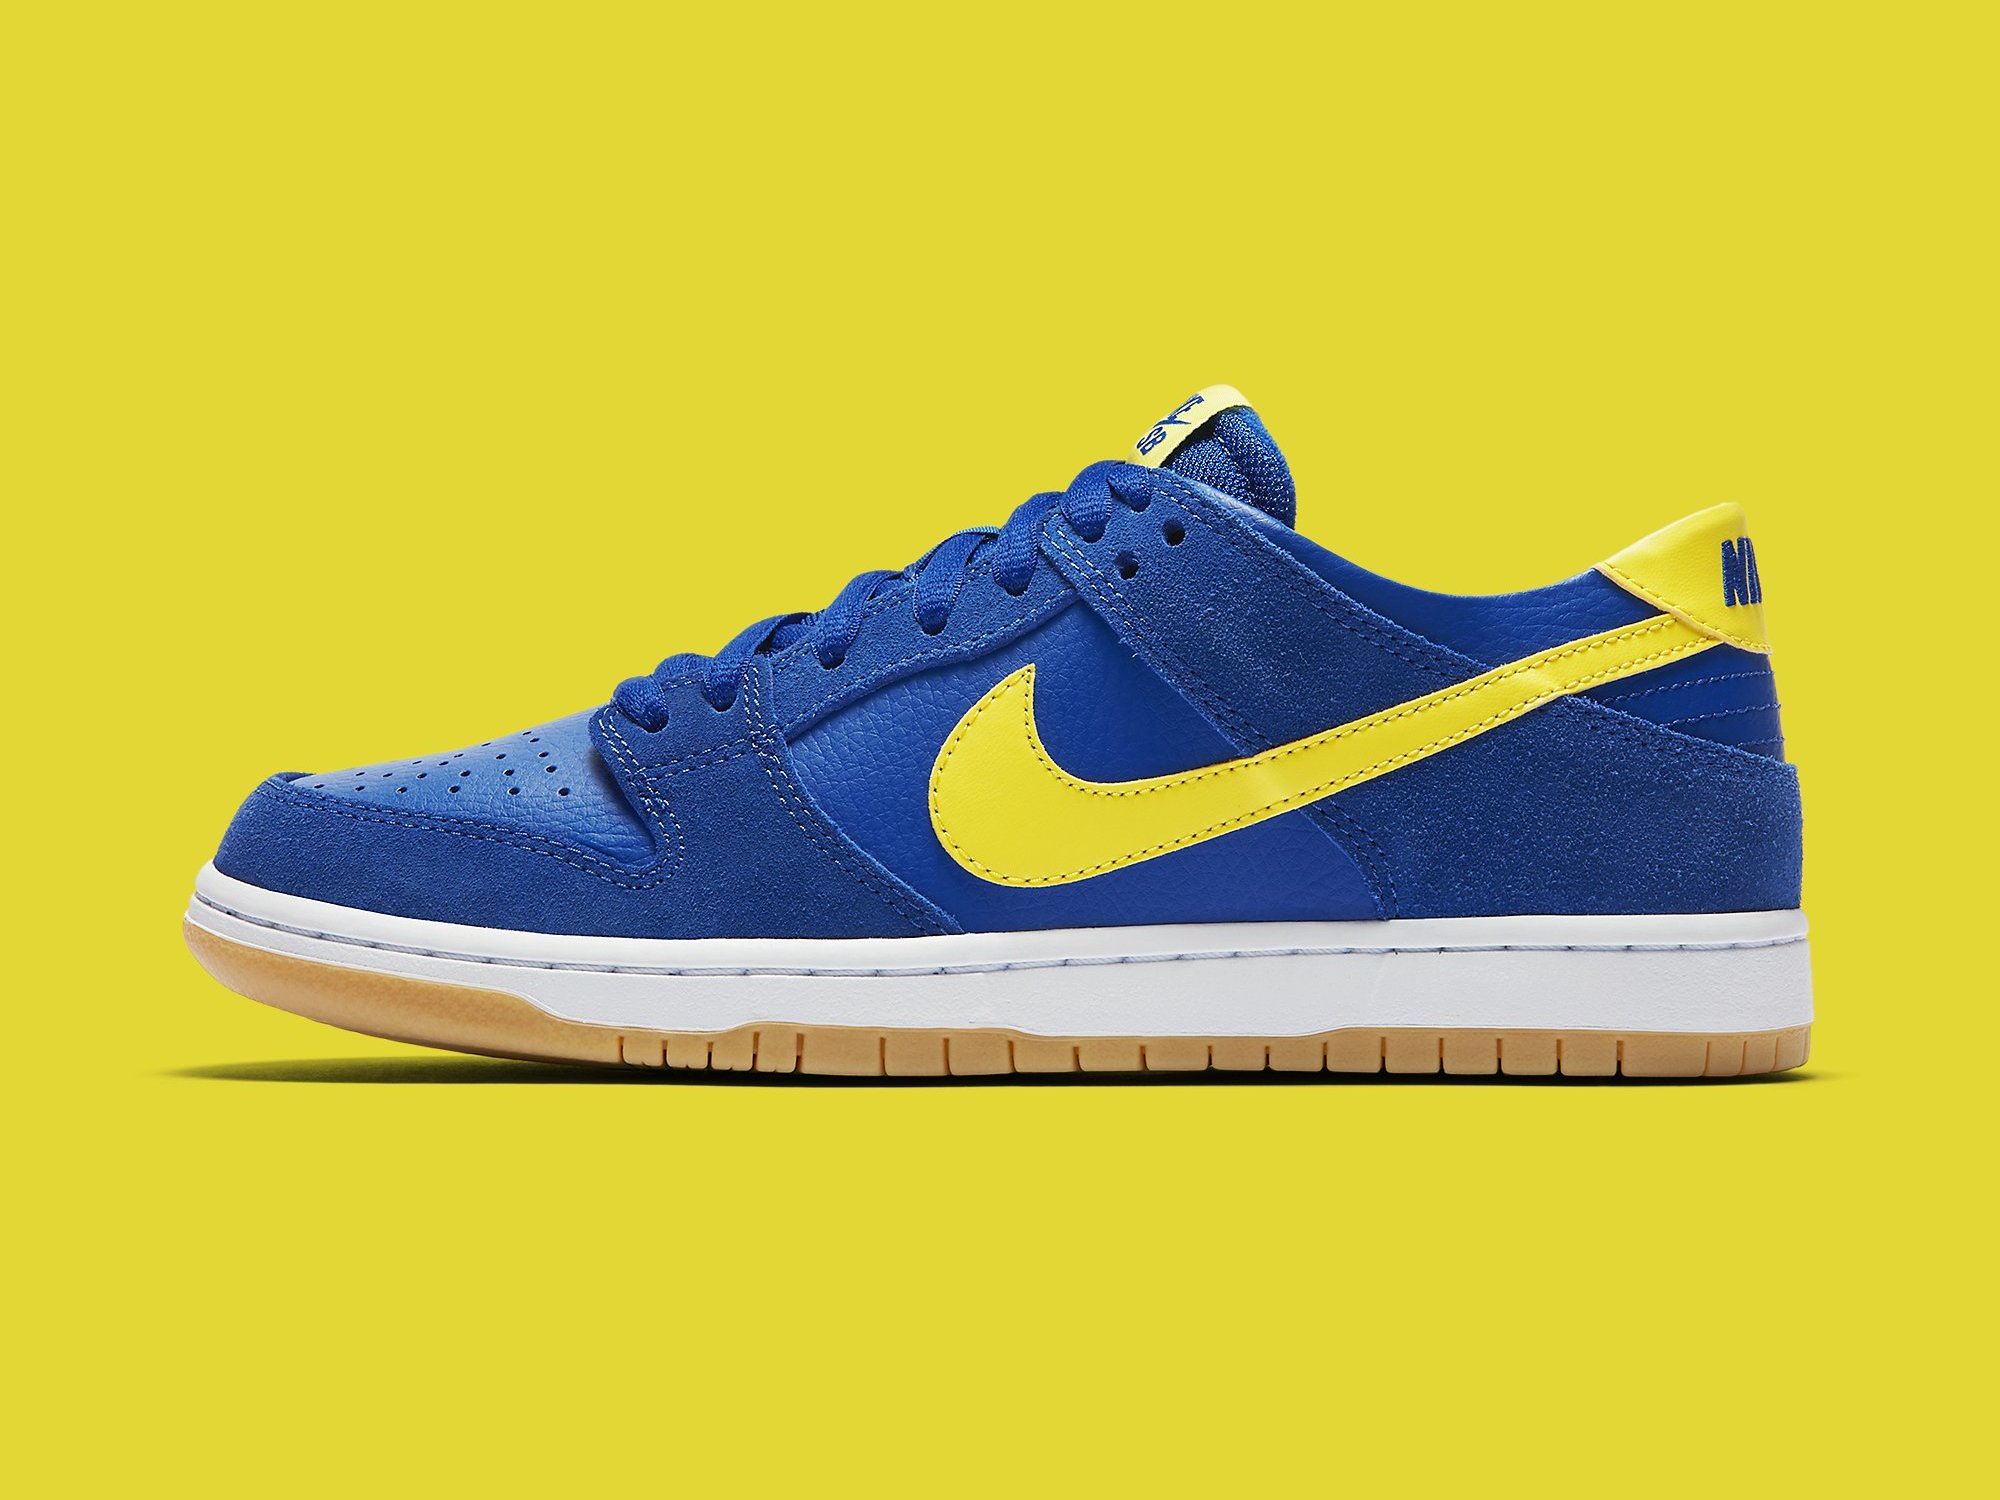 SB Zoom Dunk Low Pro "Boca | Sole Collector